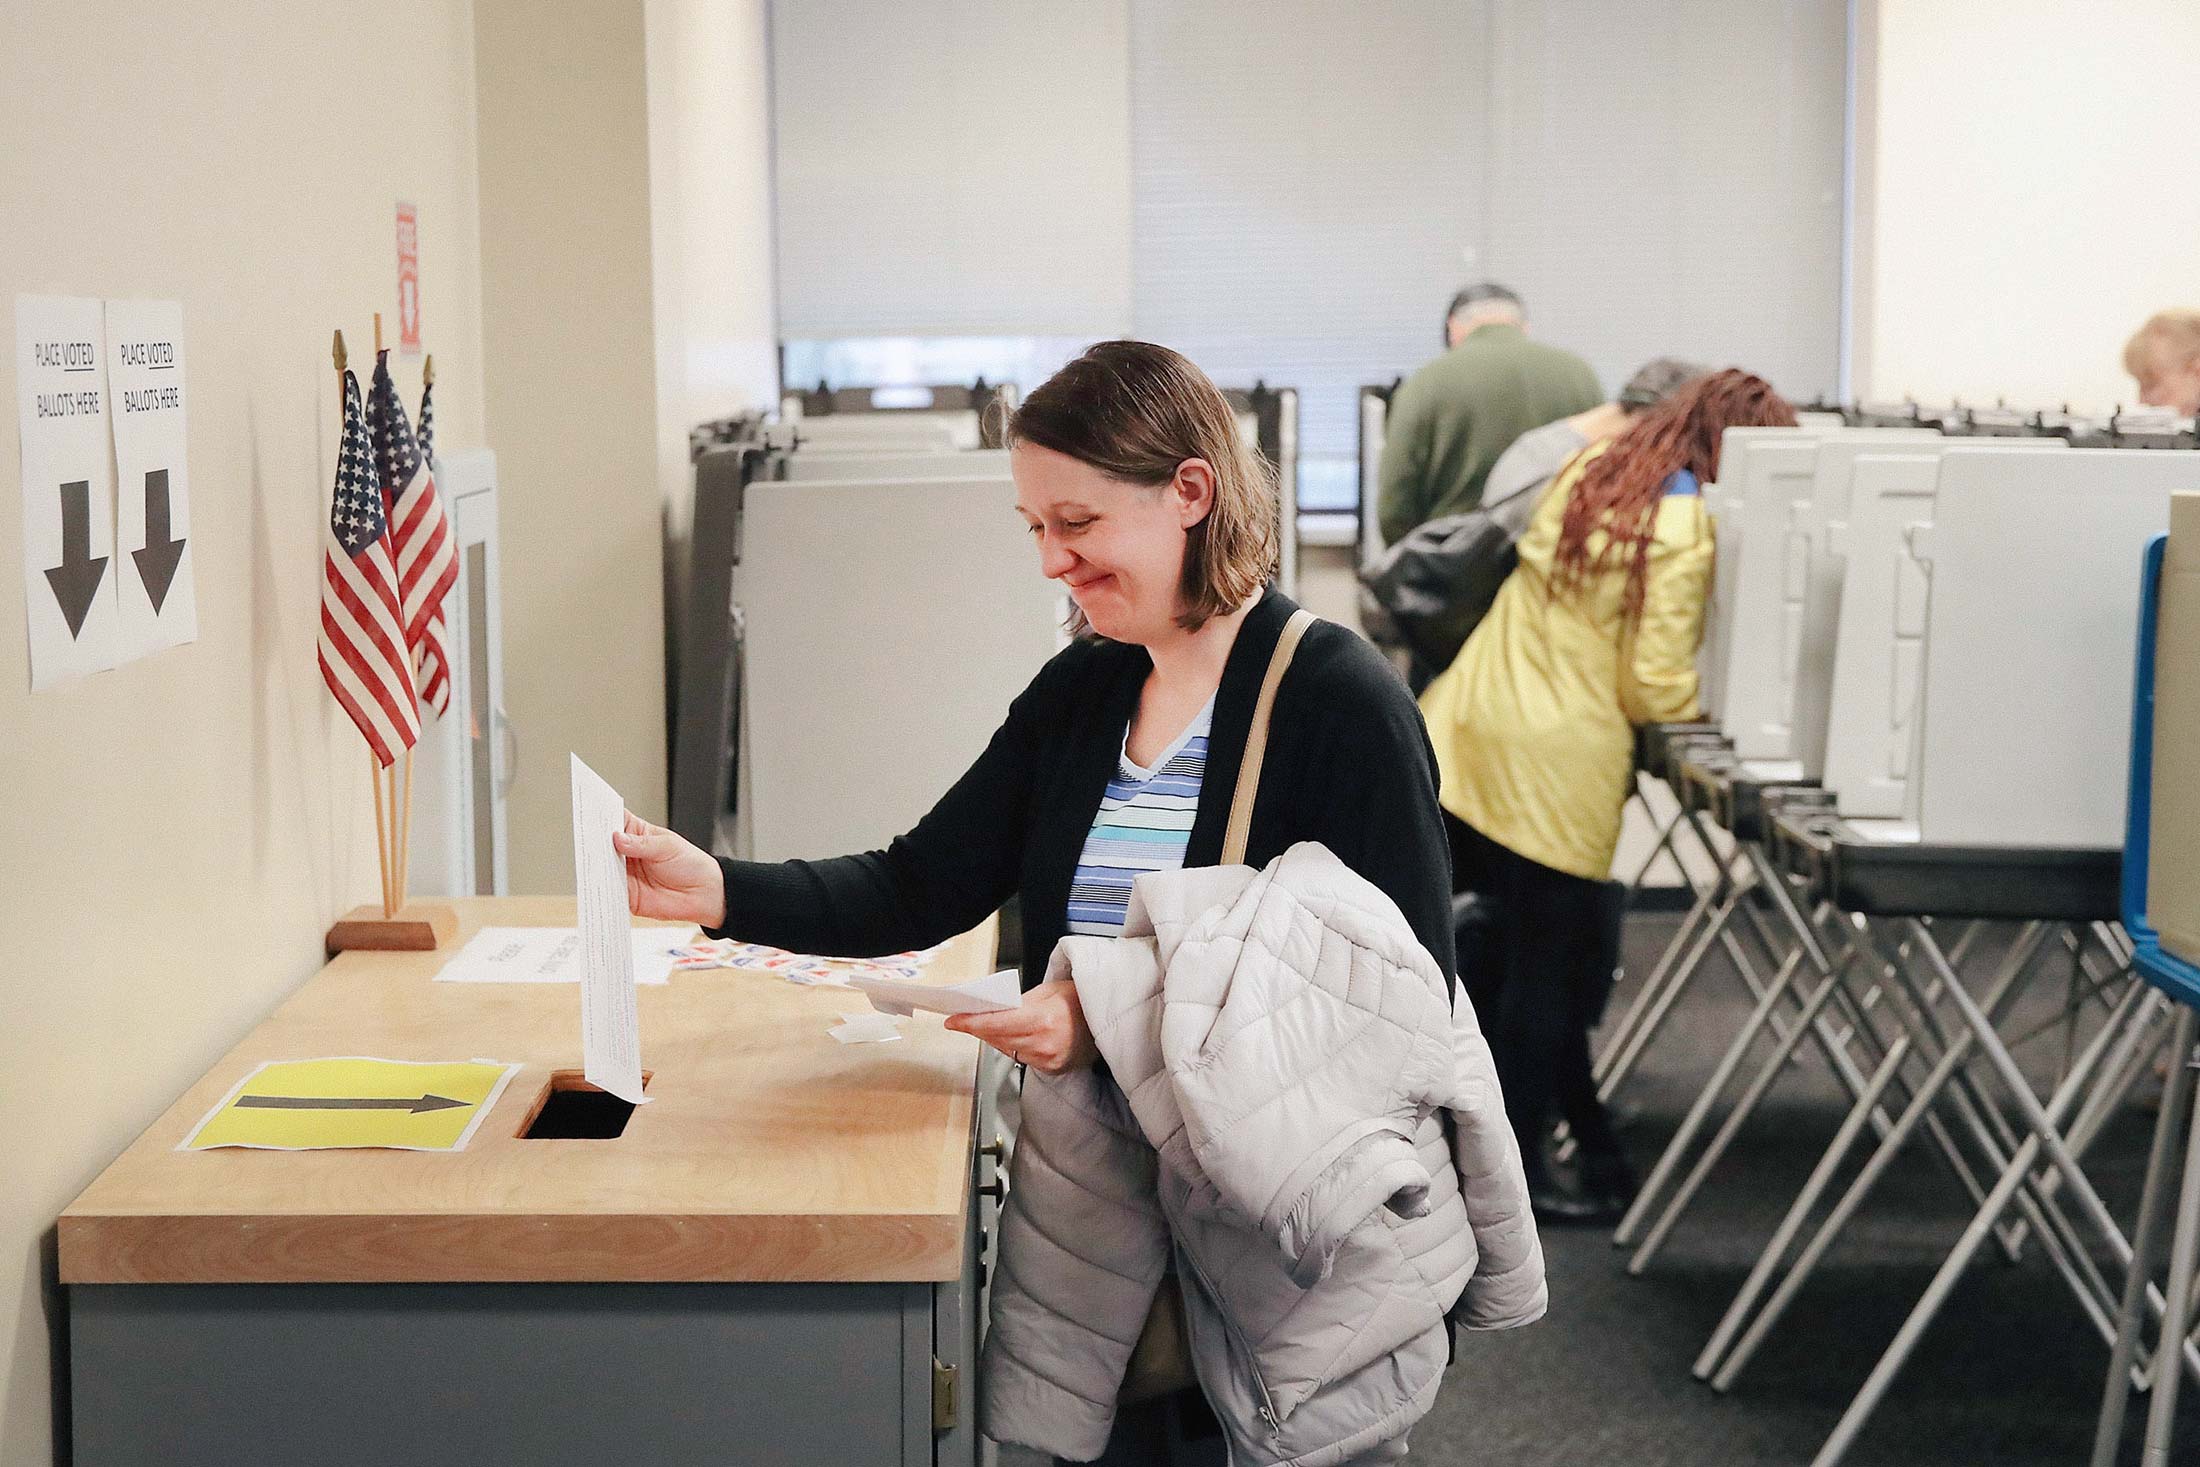 Voters cast ballots for the midterm elections at the Polk County Election Office